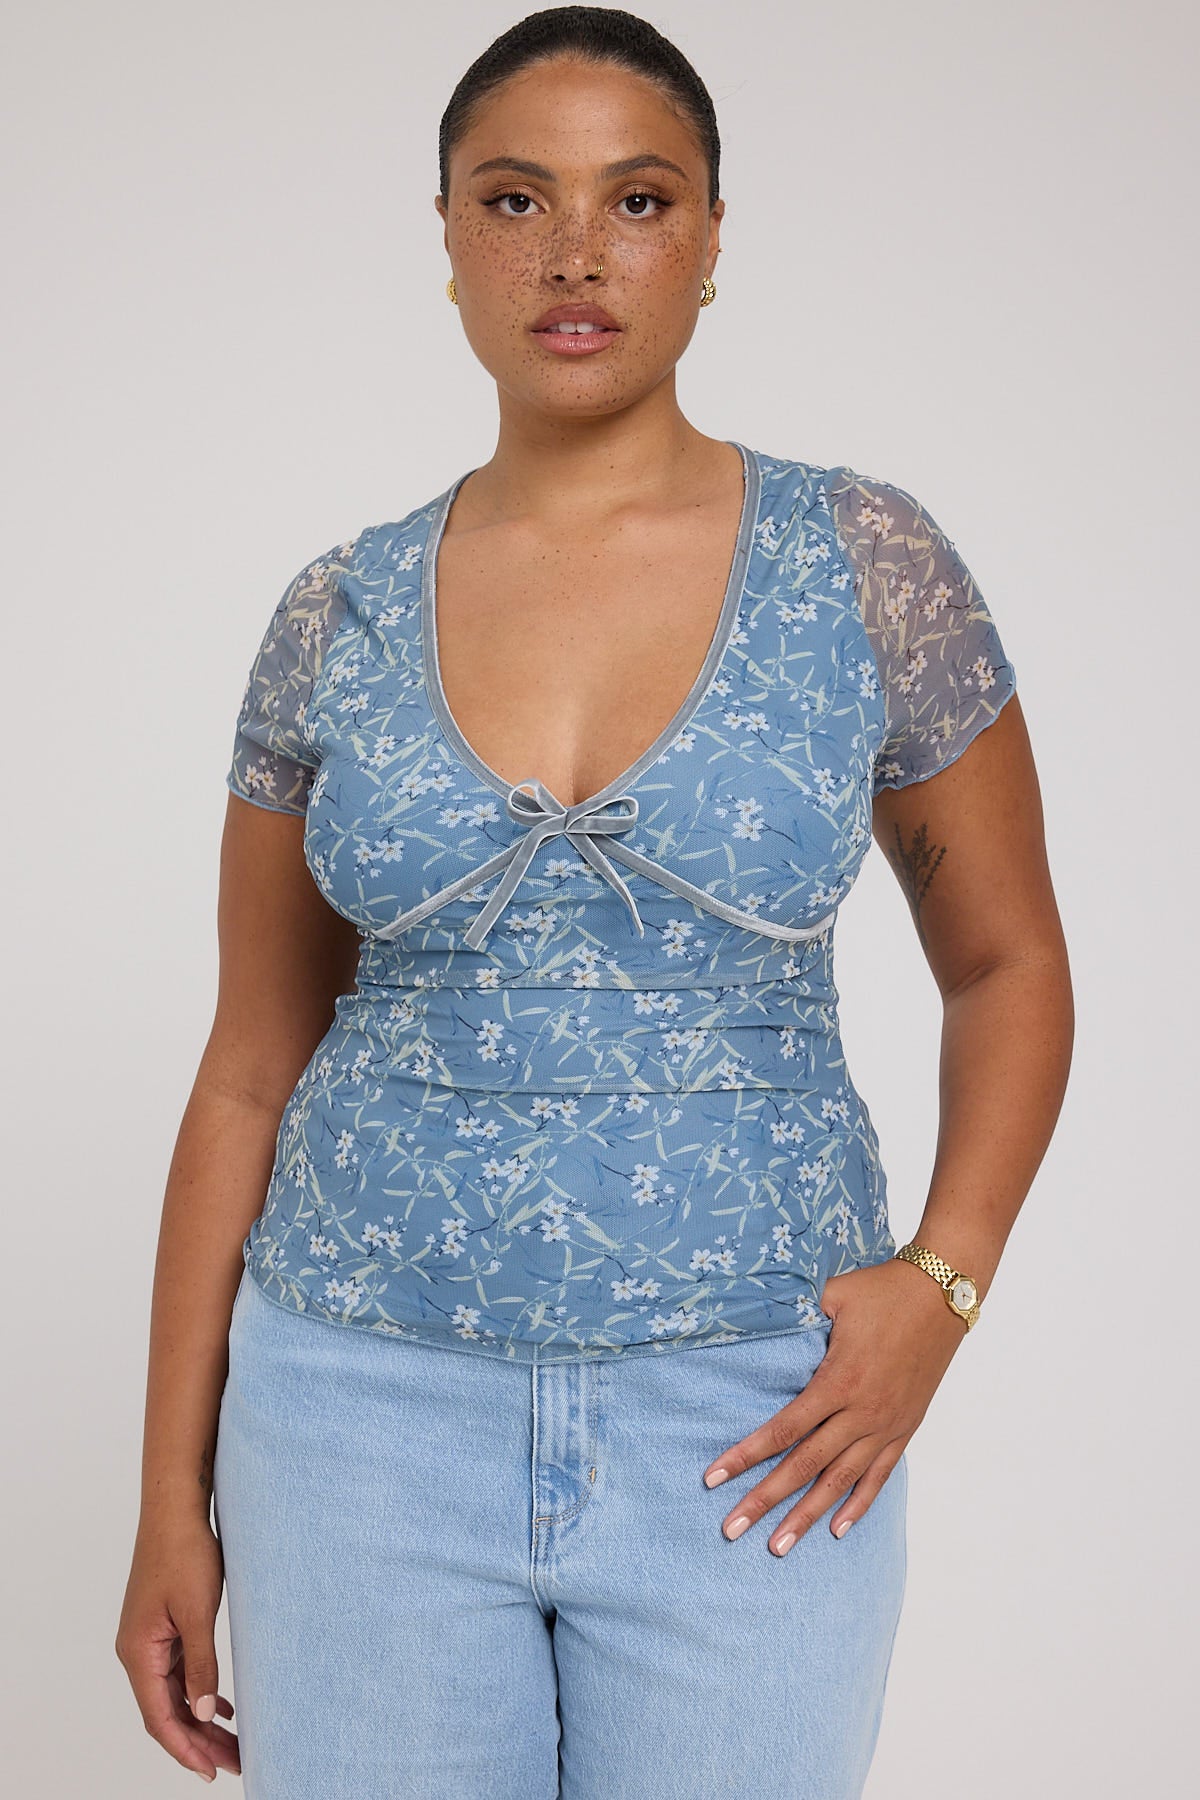 Luck & Trouble Daffodil Muse Recycled Mesh Top Blue Print